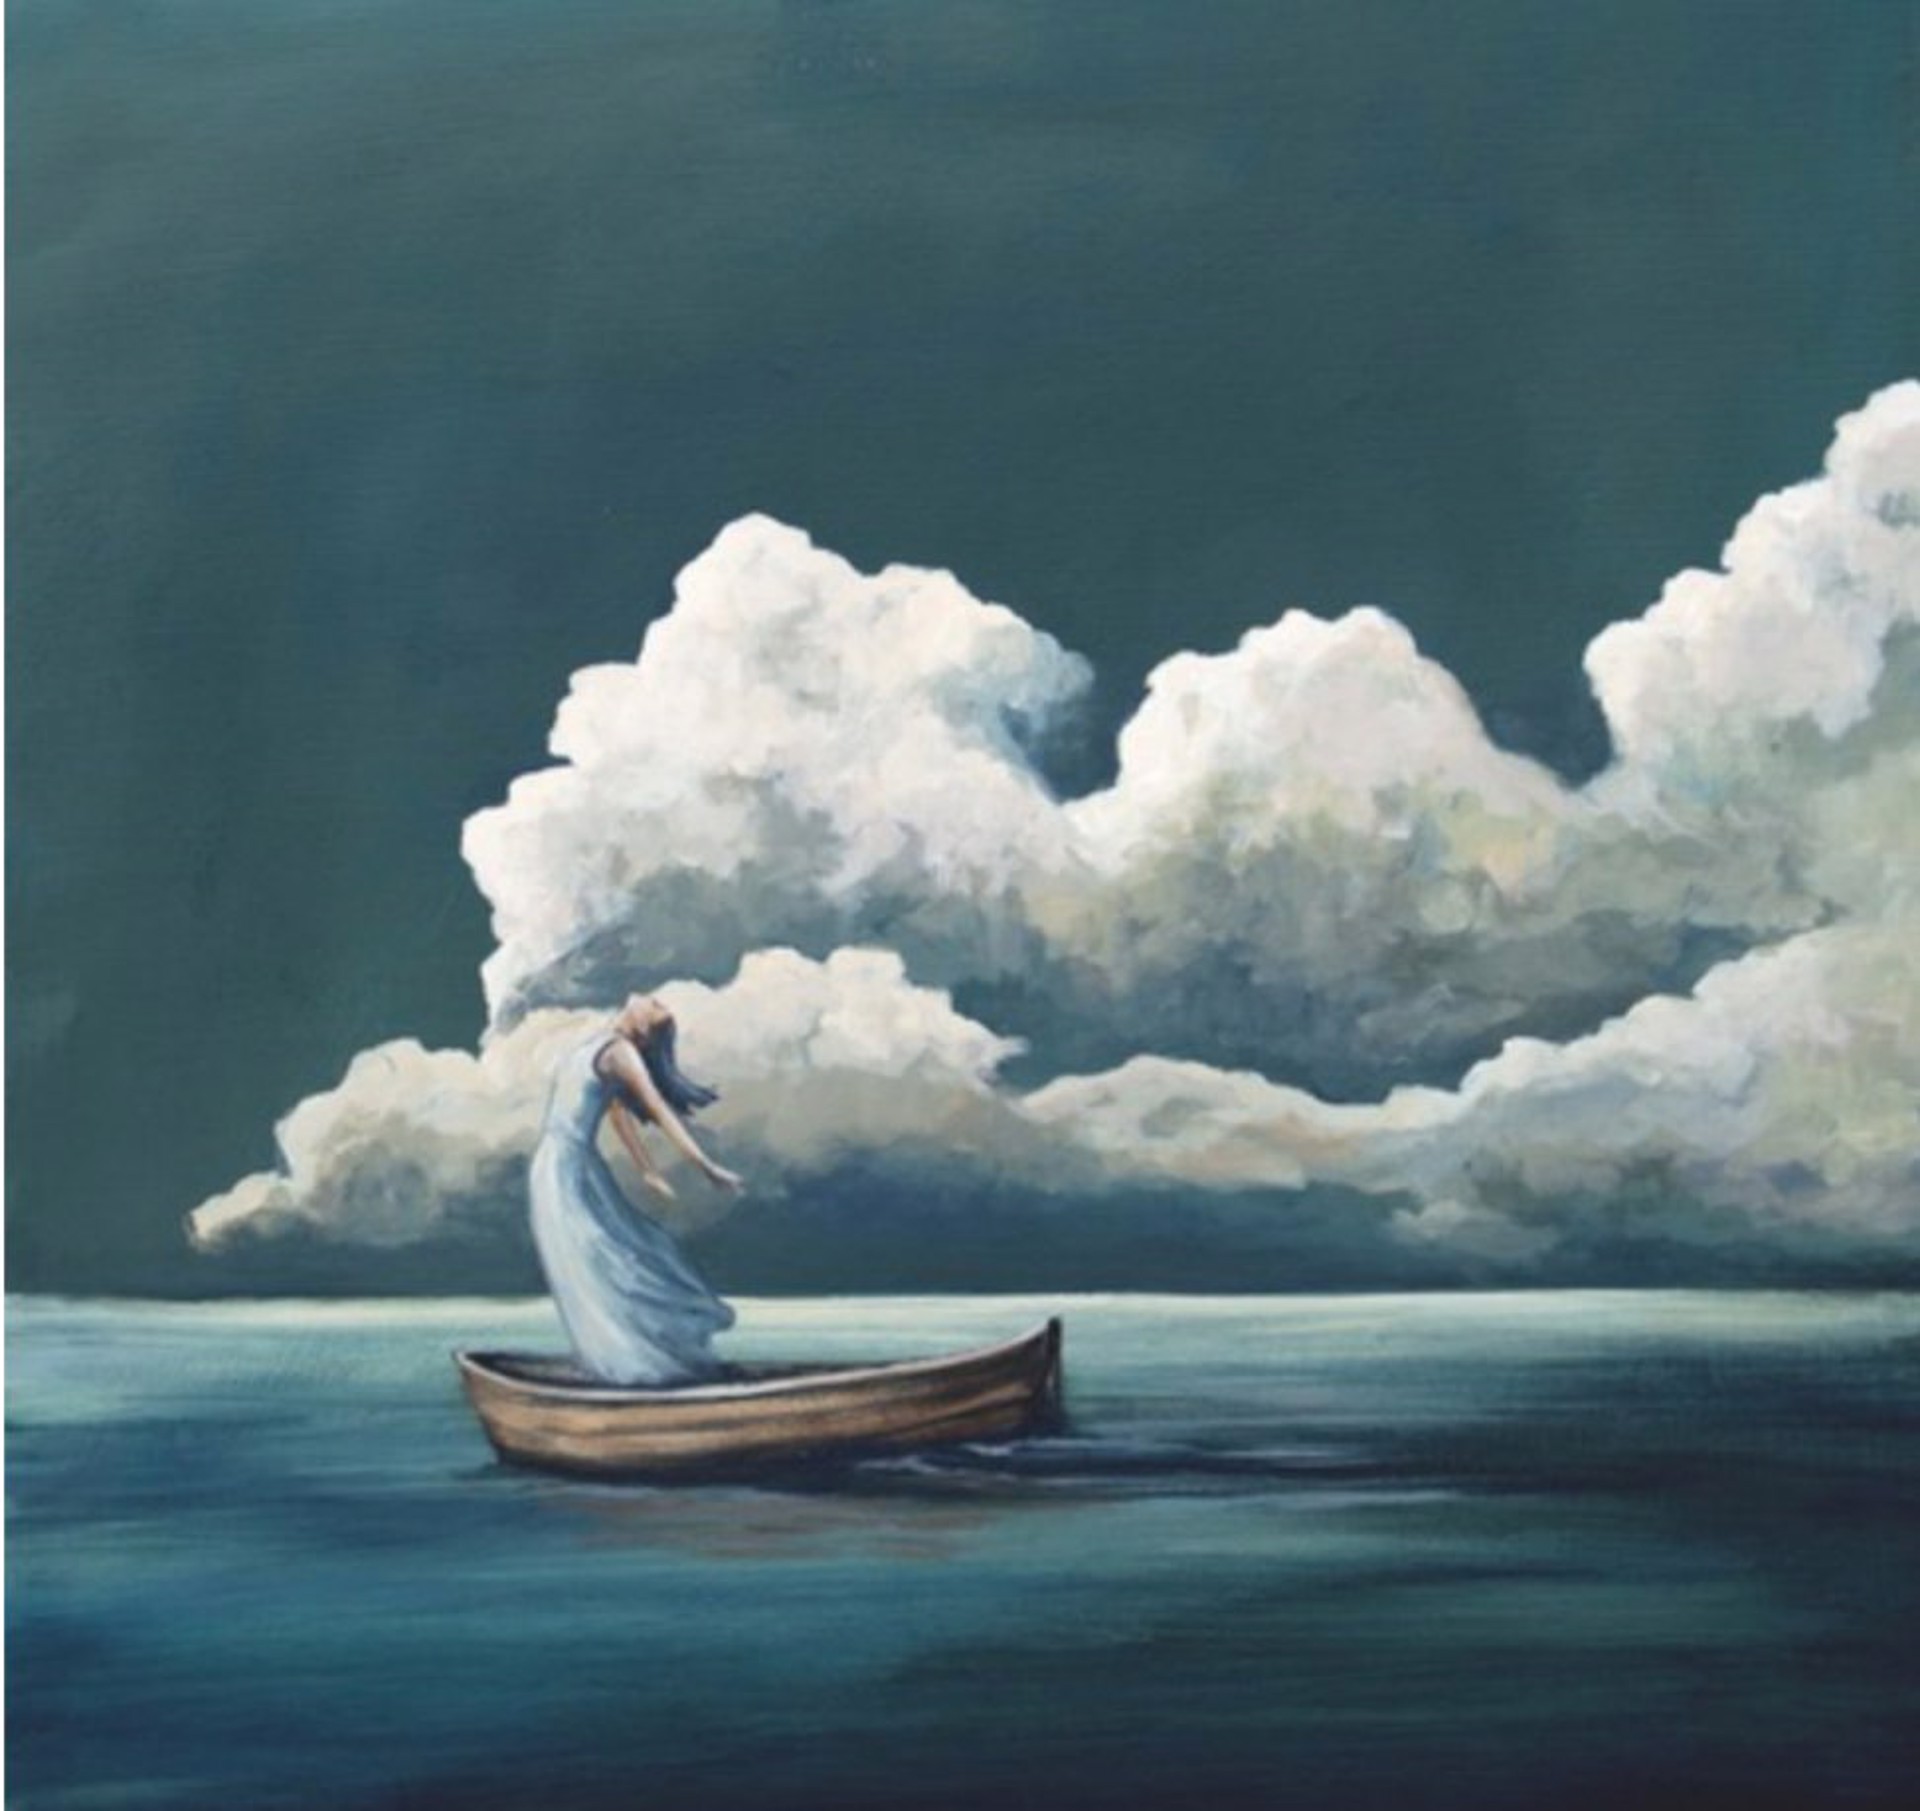 The Sail in the Storm by Laura Bowman